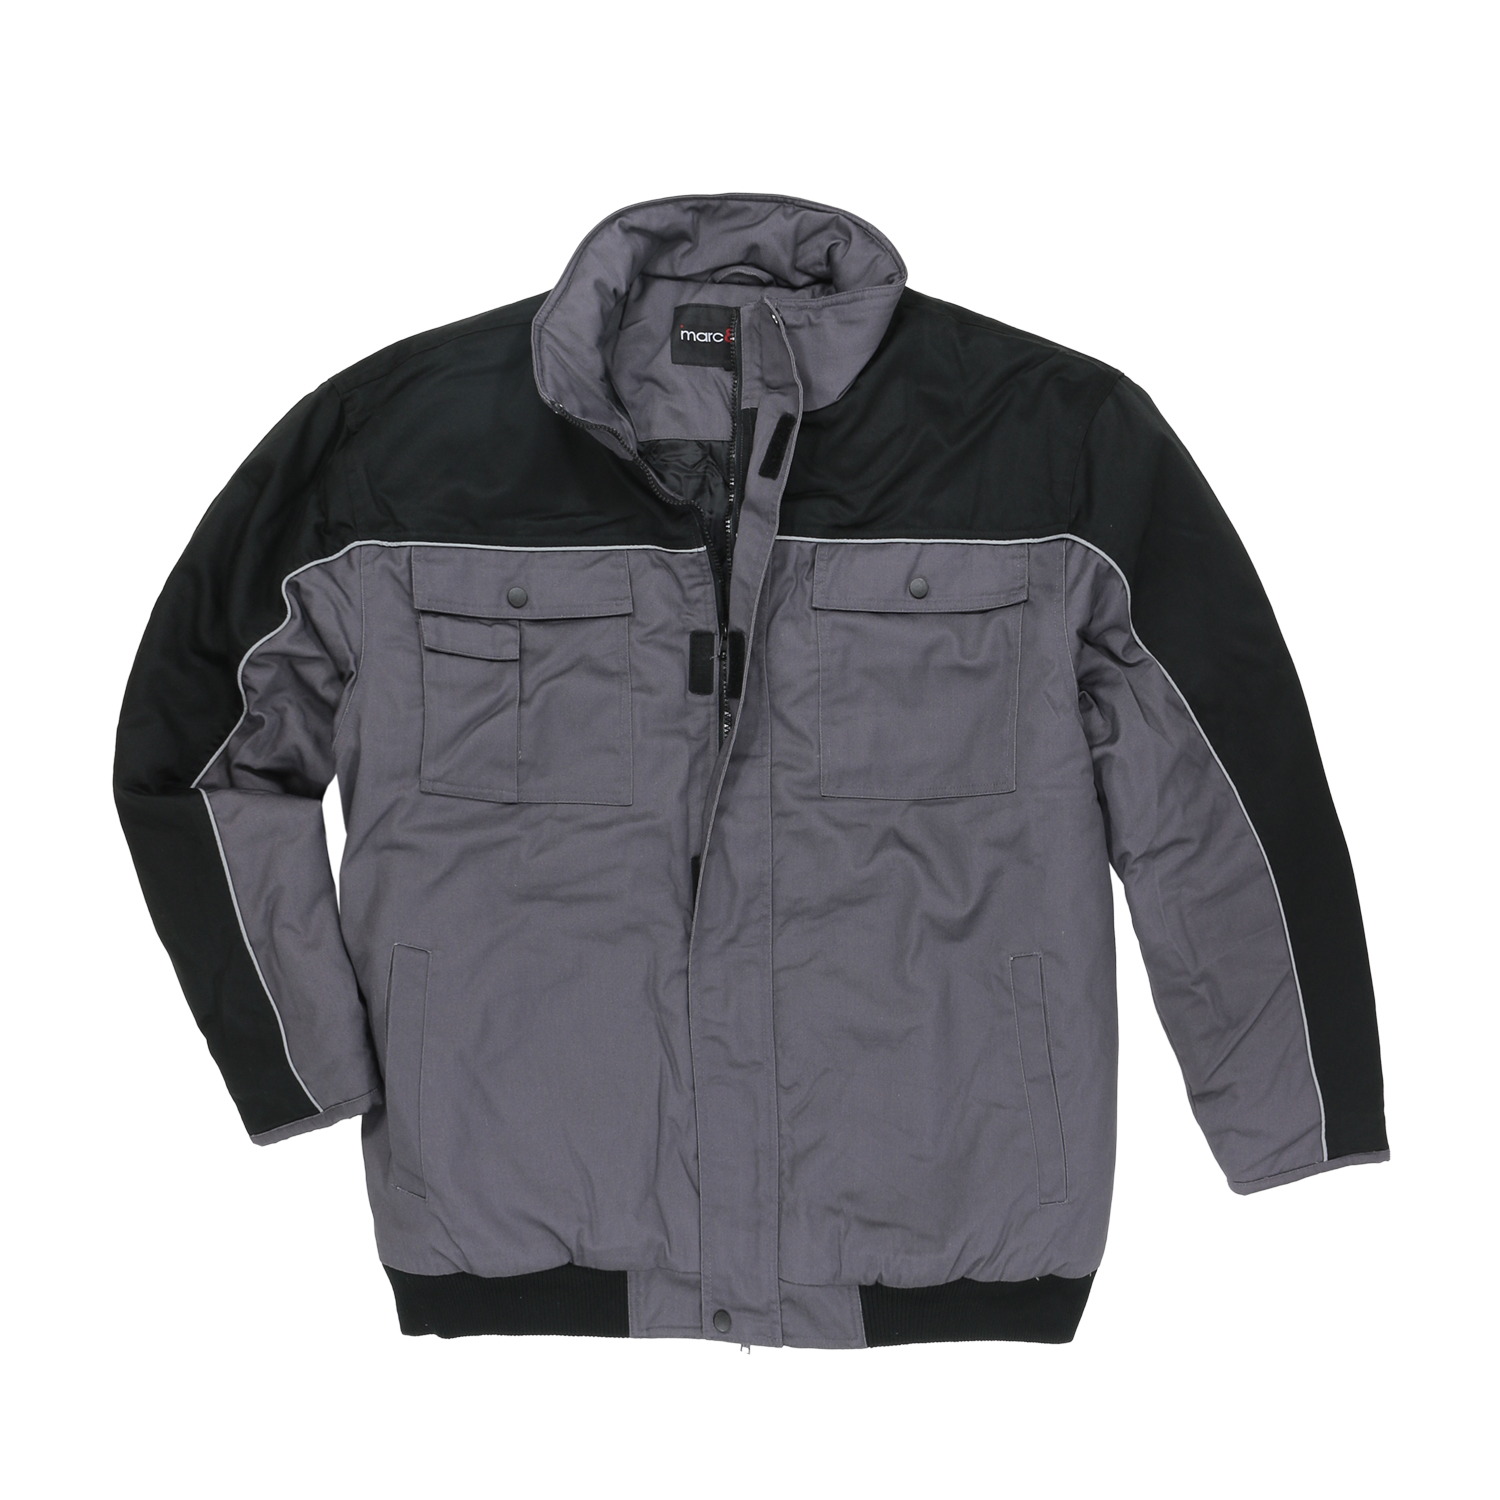 Working jacket in grey by marc&mark in extra large sizes up to 10XL